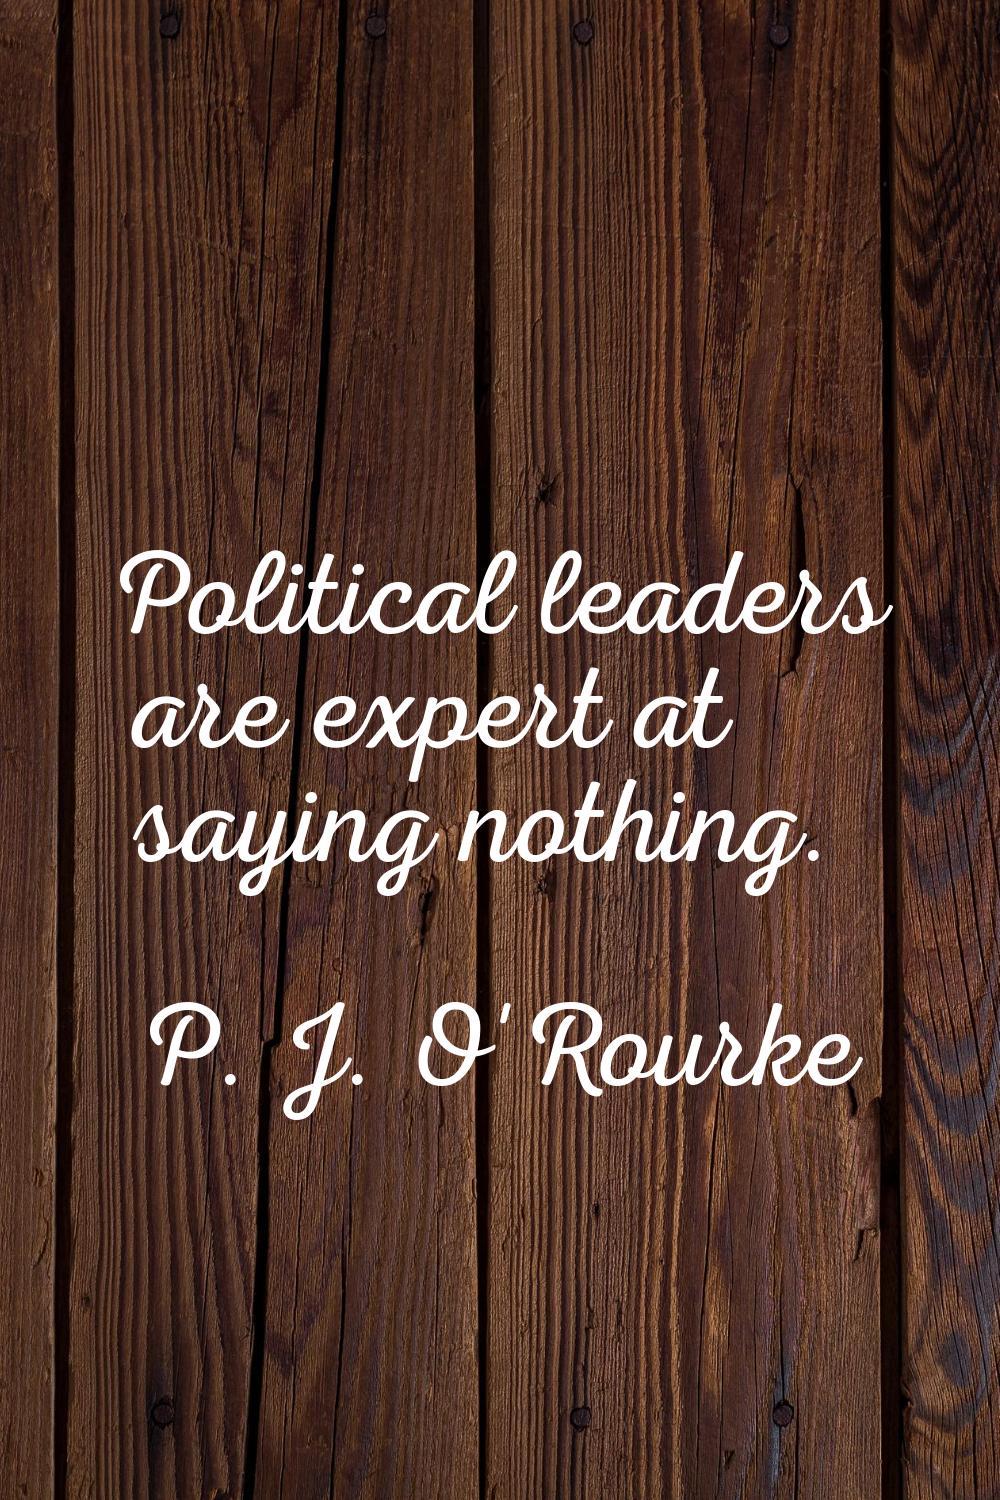 Political leaders are expert at saying nothing.